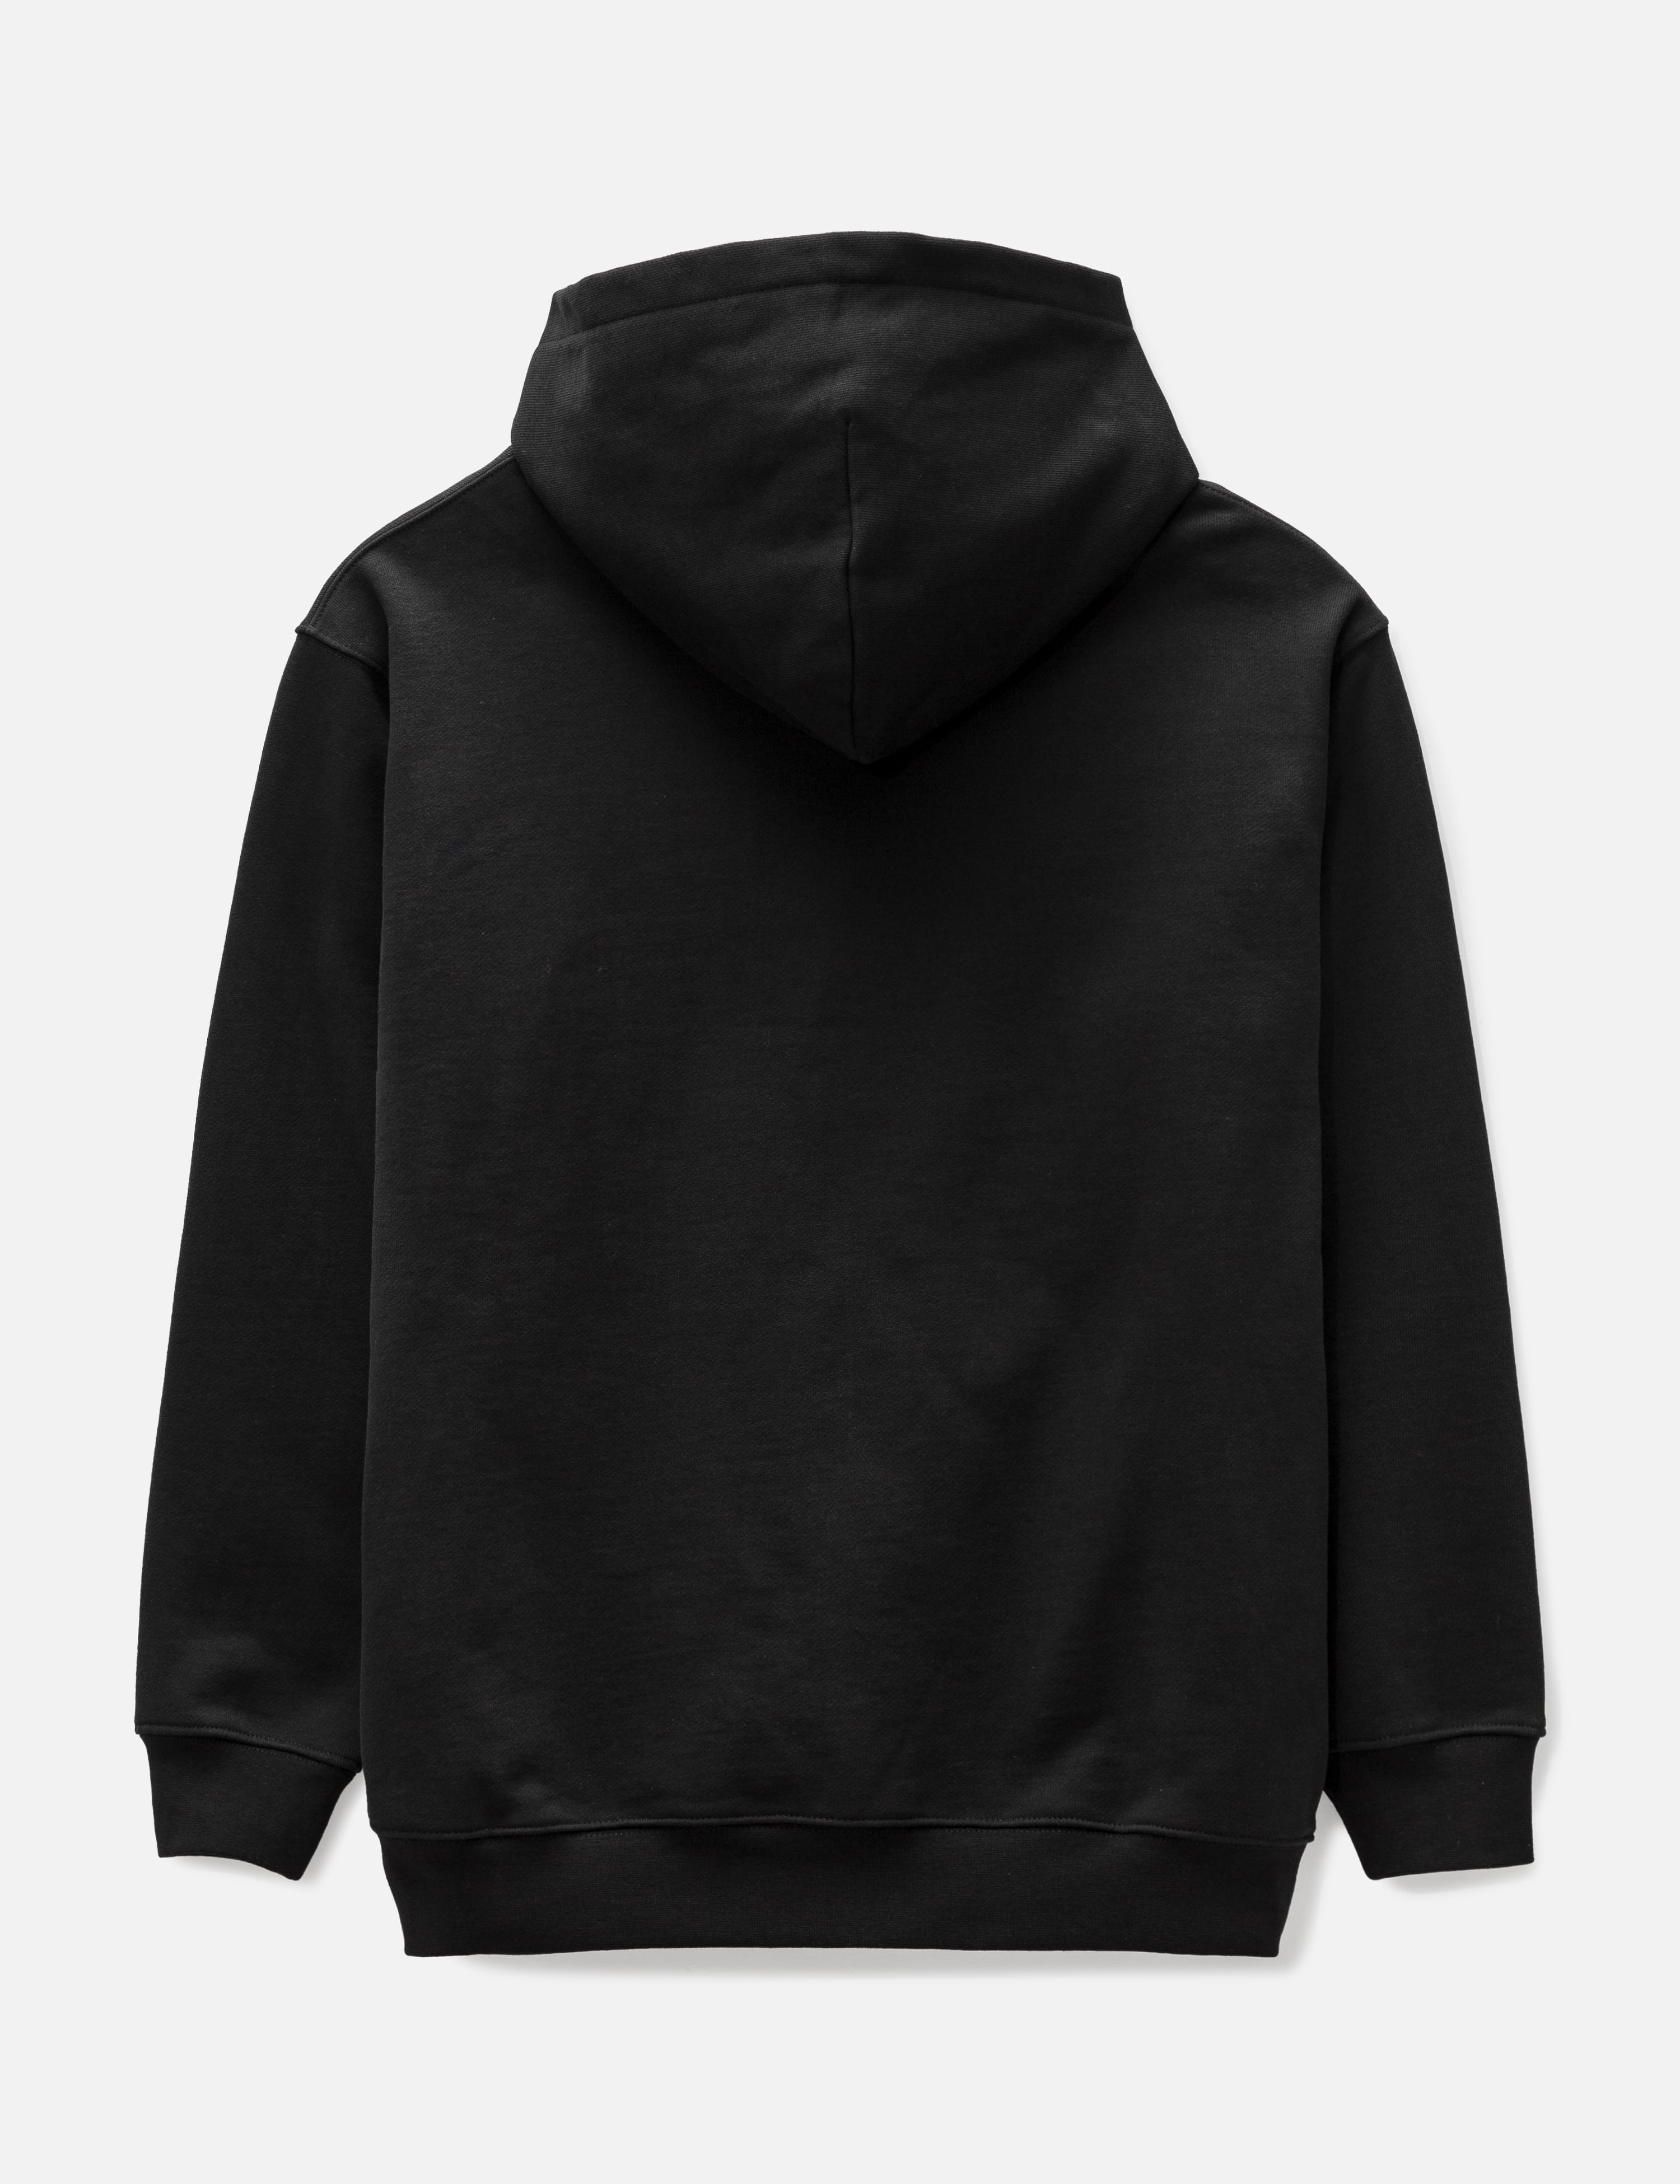 Dime - Decker Hoodie | HBX - Globally Curated Fashion and